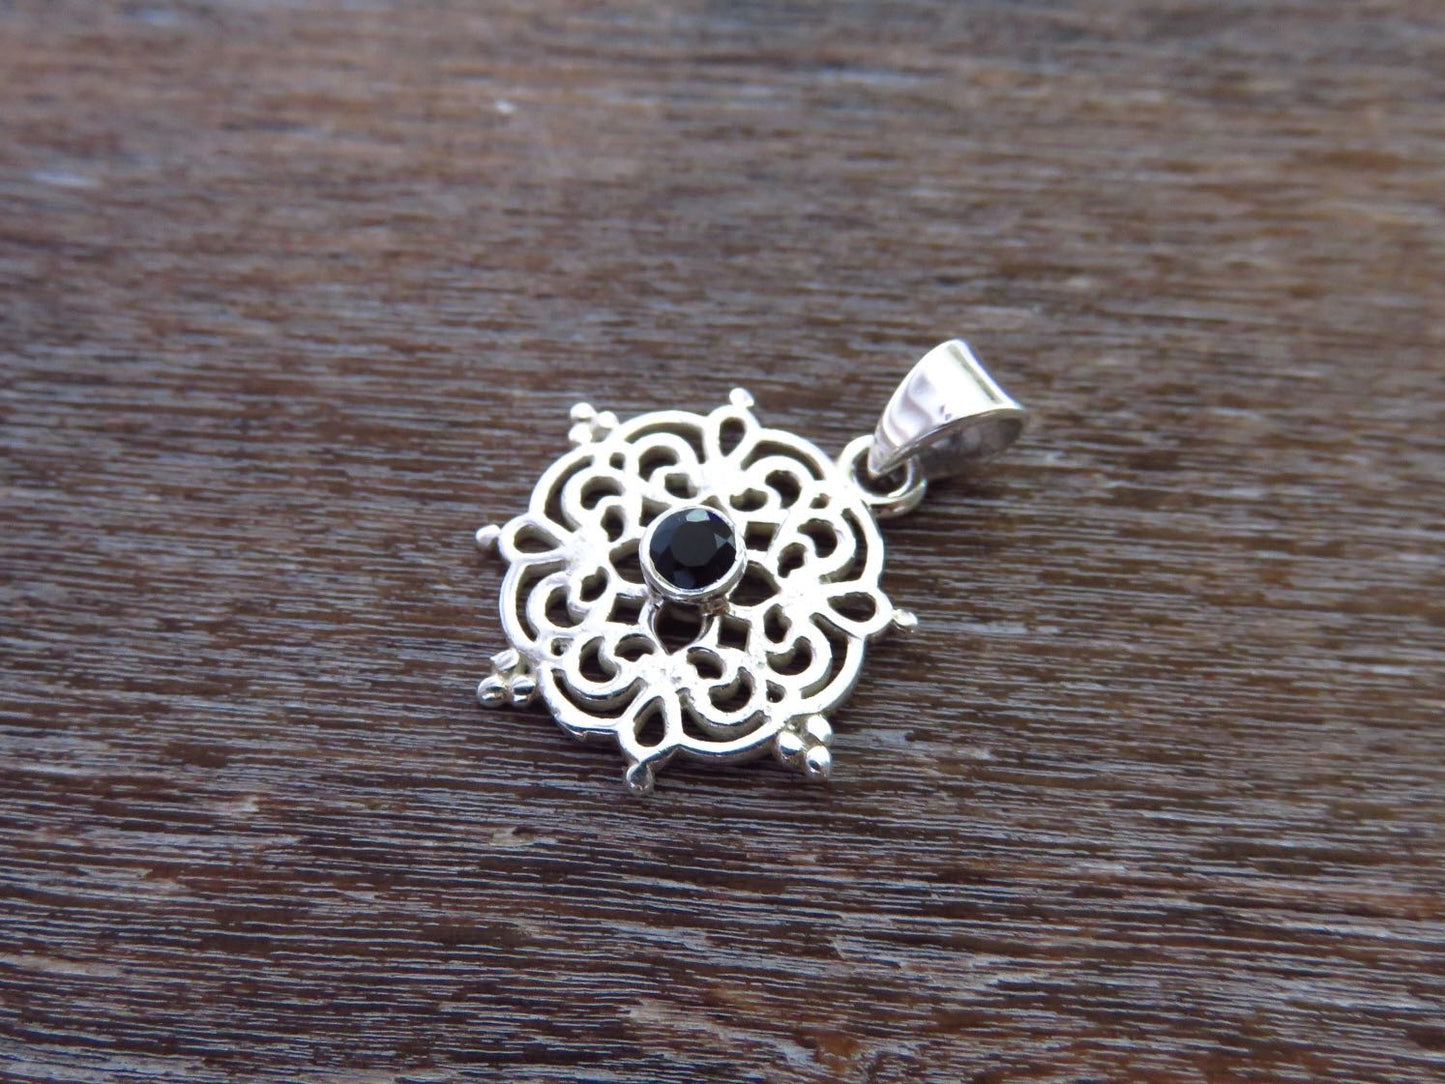 small filigree pendant with black spinel made of silver 